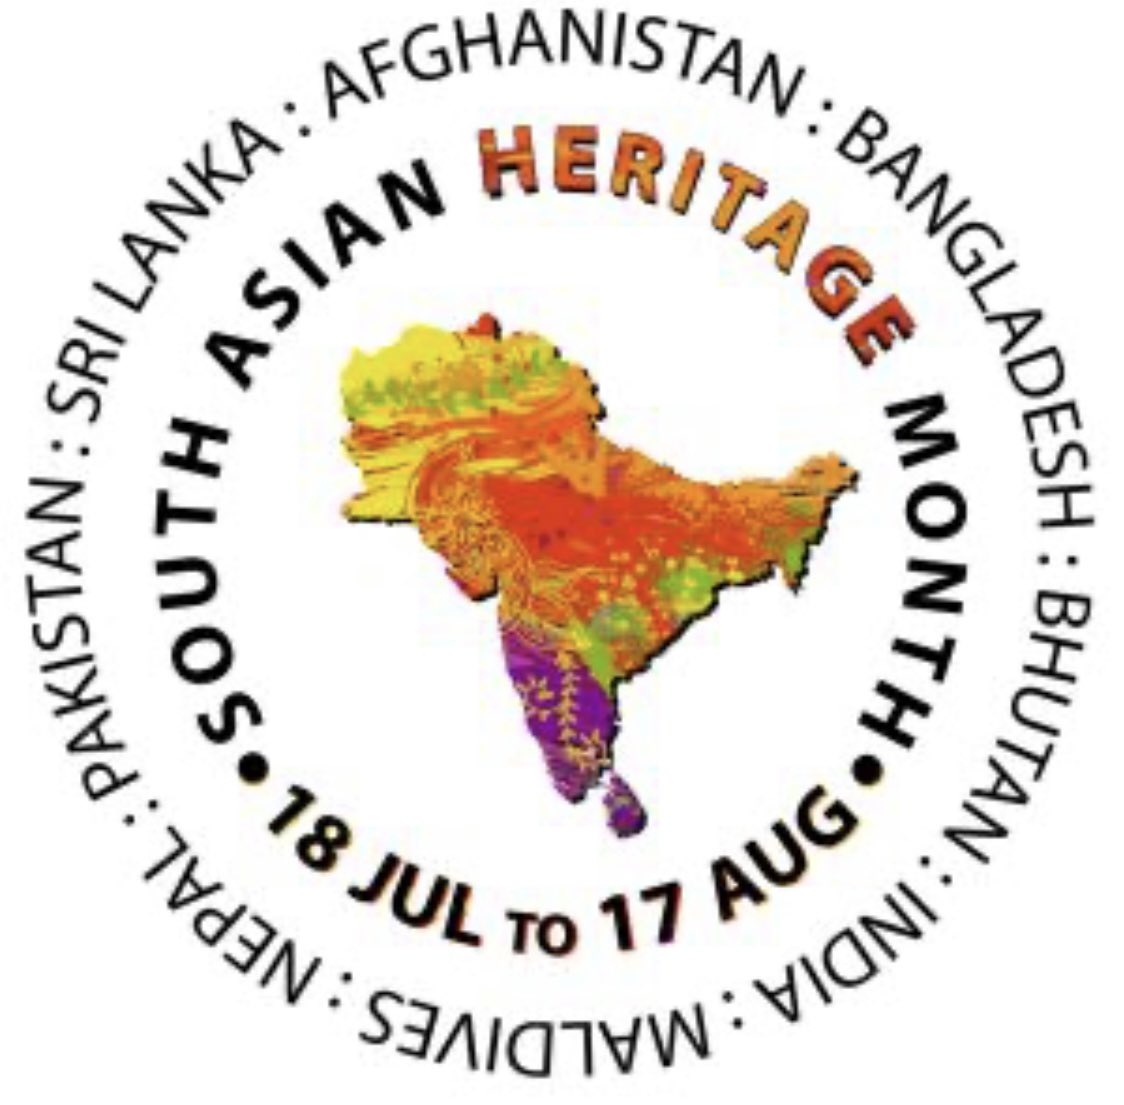 Today marks the start of #SouthAsianHeritageMonth (18 July - 17 August). The theme for this year is ‘stories to tell’ - celebrating the narratives that make up our rich, diverse and vibrant communities. What is your heritage story?